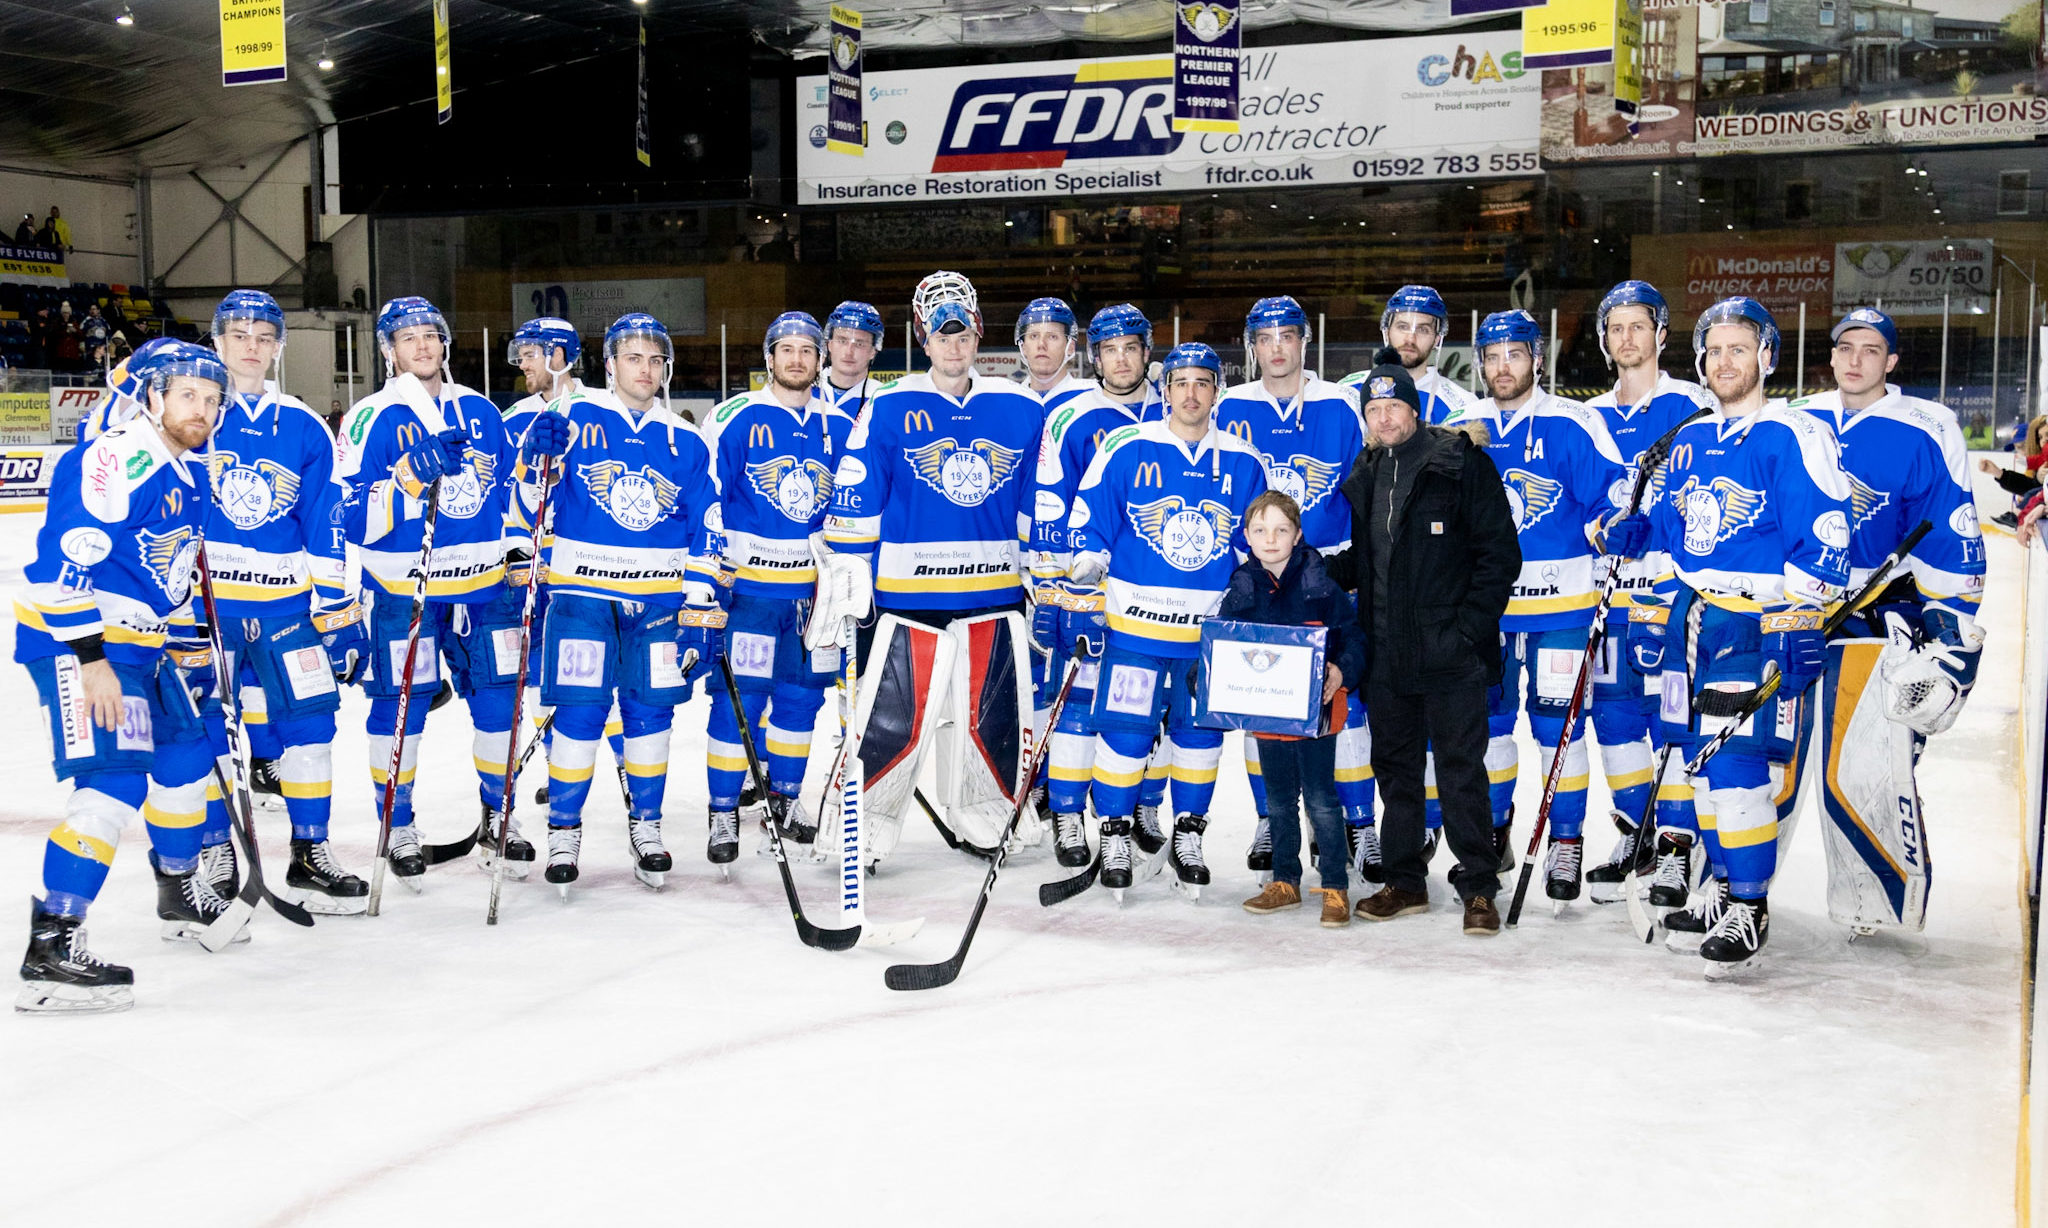 Archie and dad Walter with the Fife Flyers team.